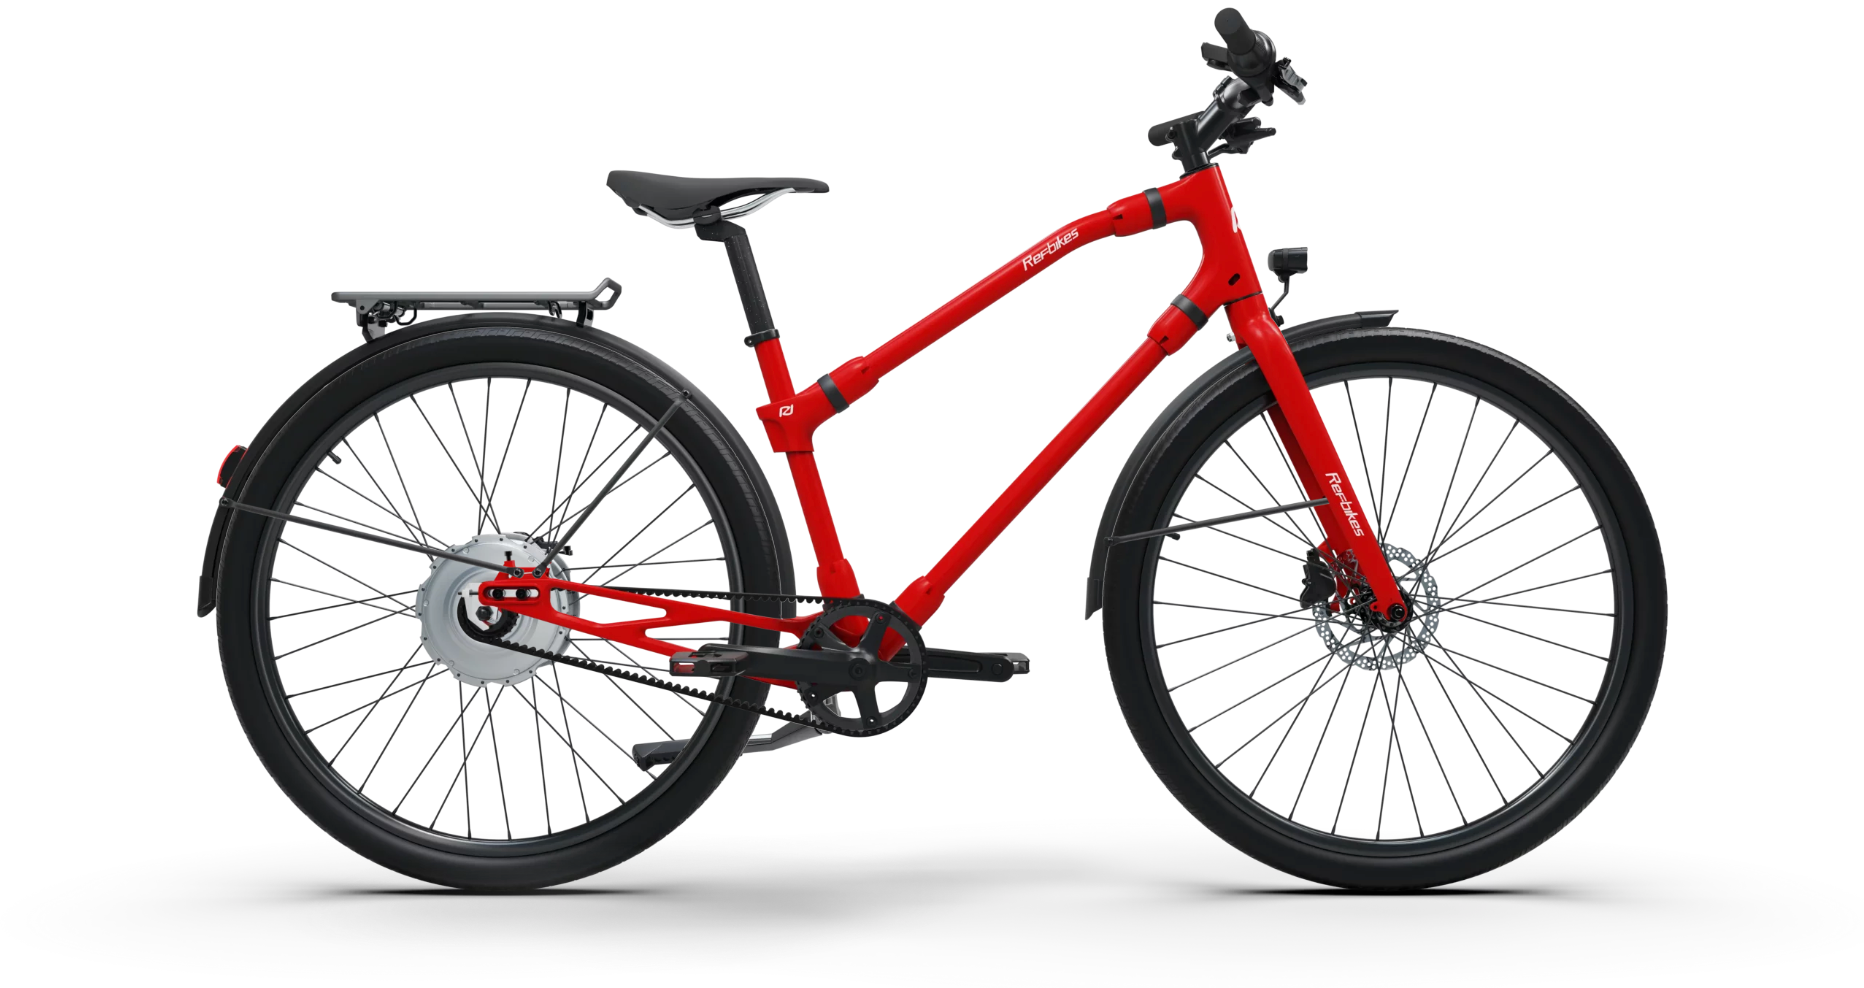 Red Urban Boost bicycle posed against a white backdrop, highlighting its vibrant color and stylish build.